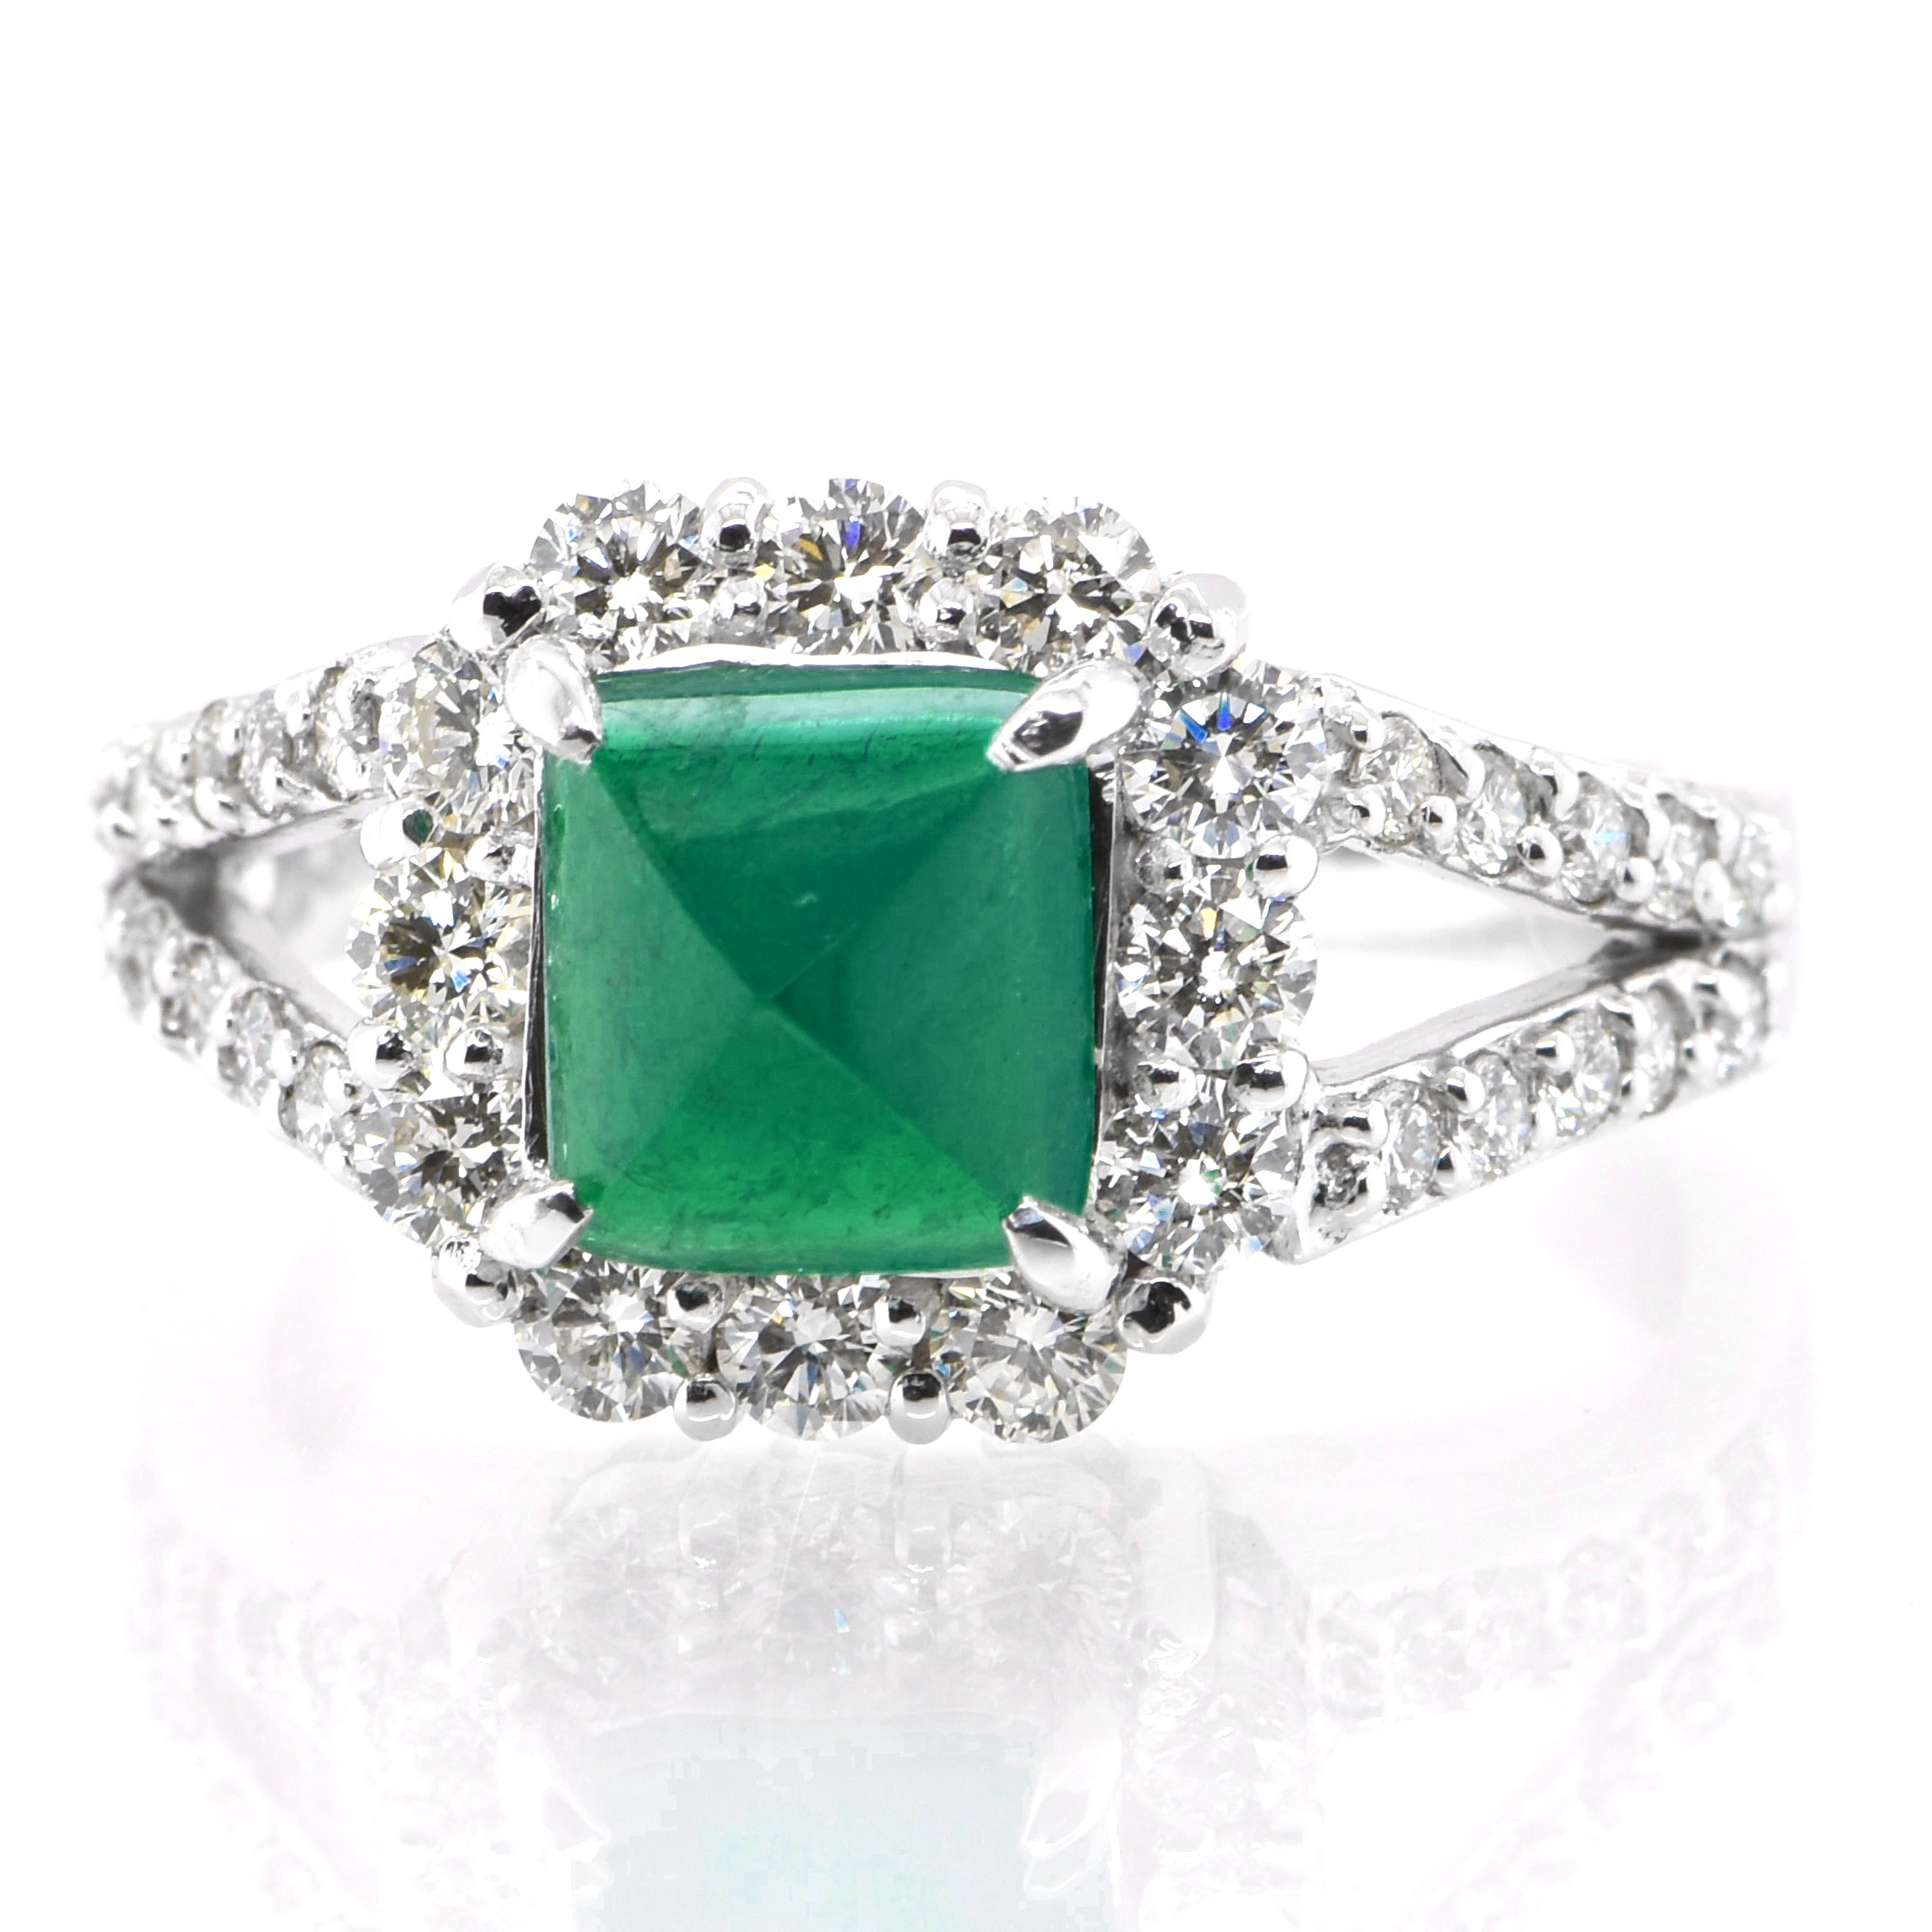 Modern 1.35 Carat Natural Emerald Sugarloaf Cabochon and Diamond Ring Set in Platinum For Sale